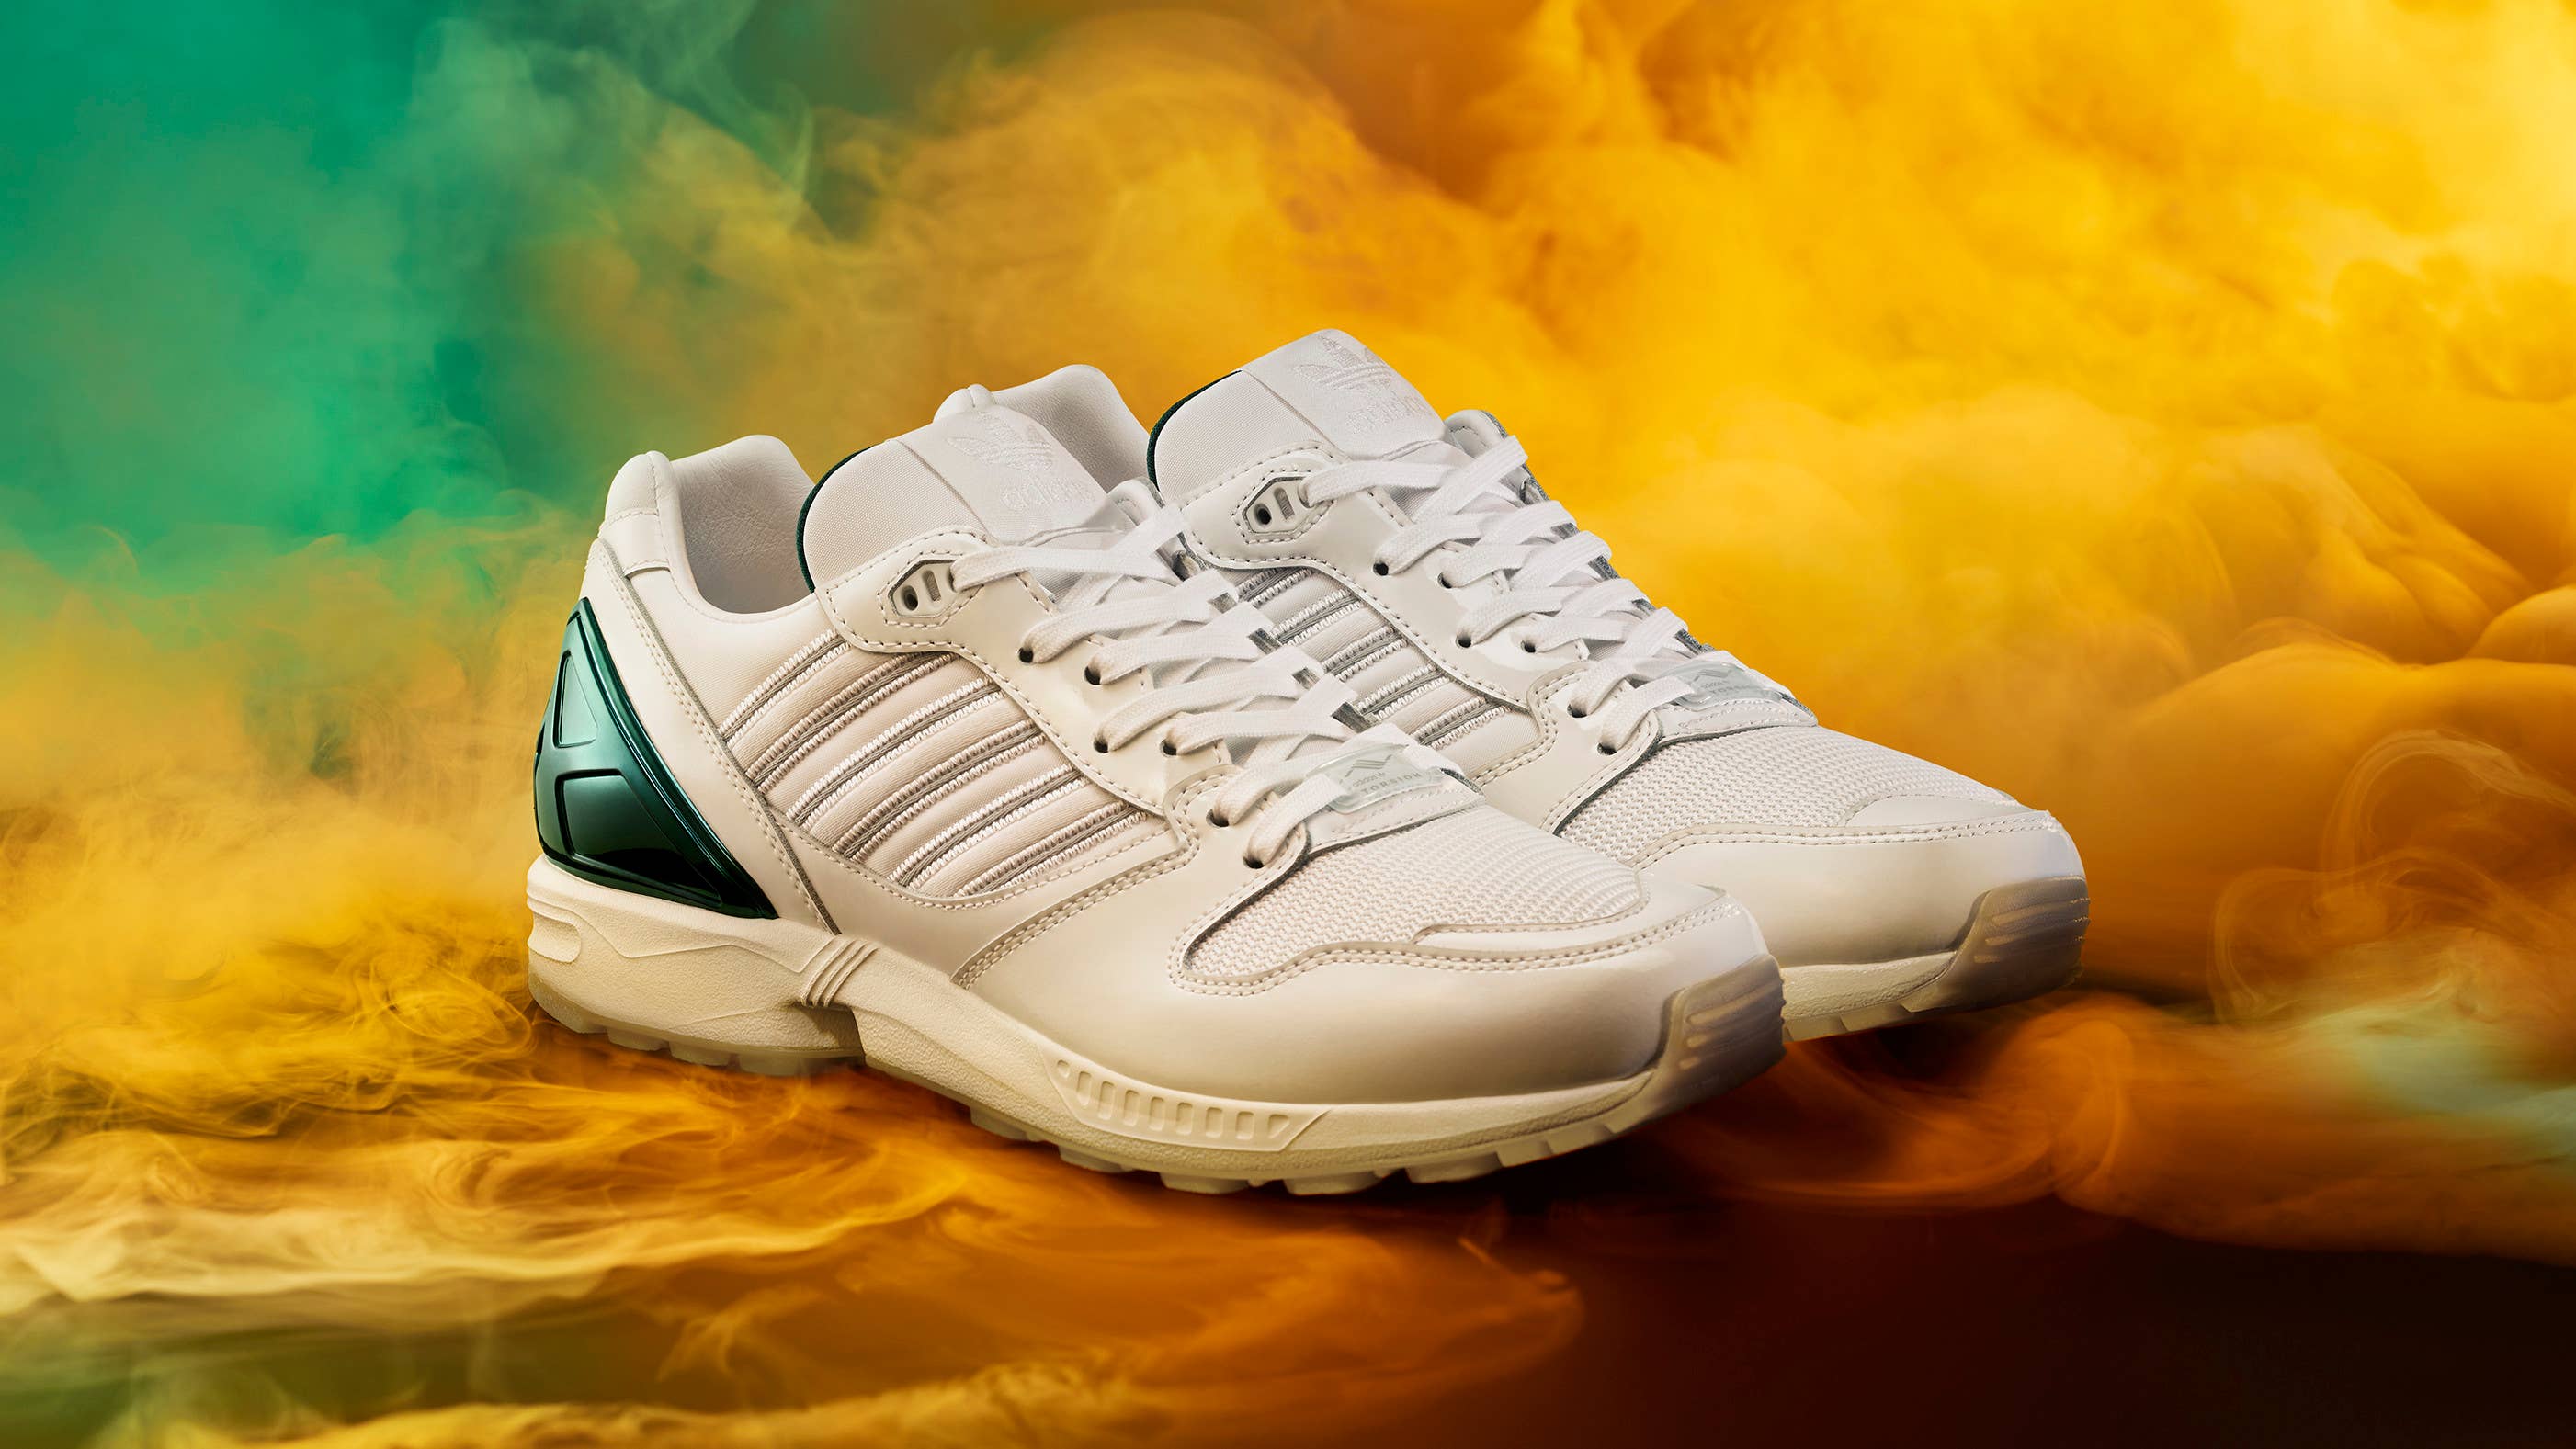 Adidas of Miami With New ZX 5000 Colorway | Complex